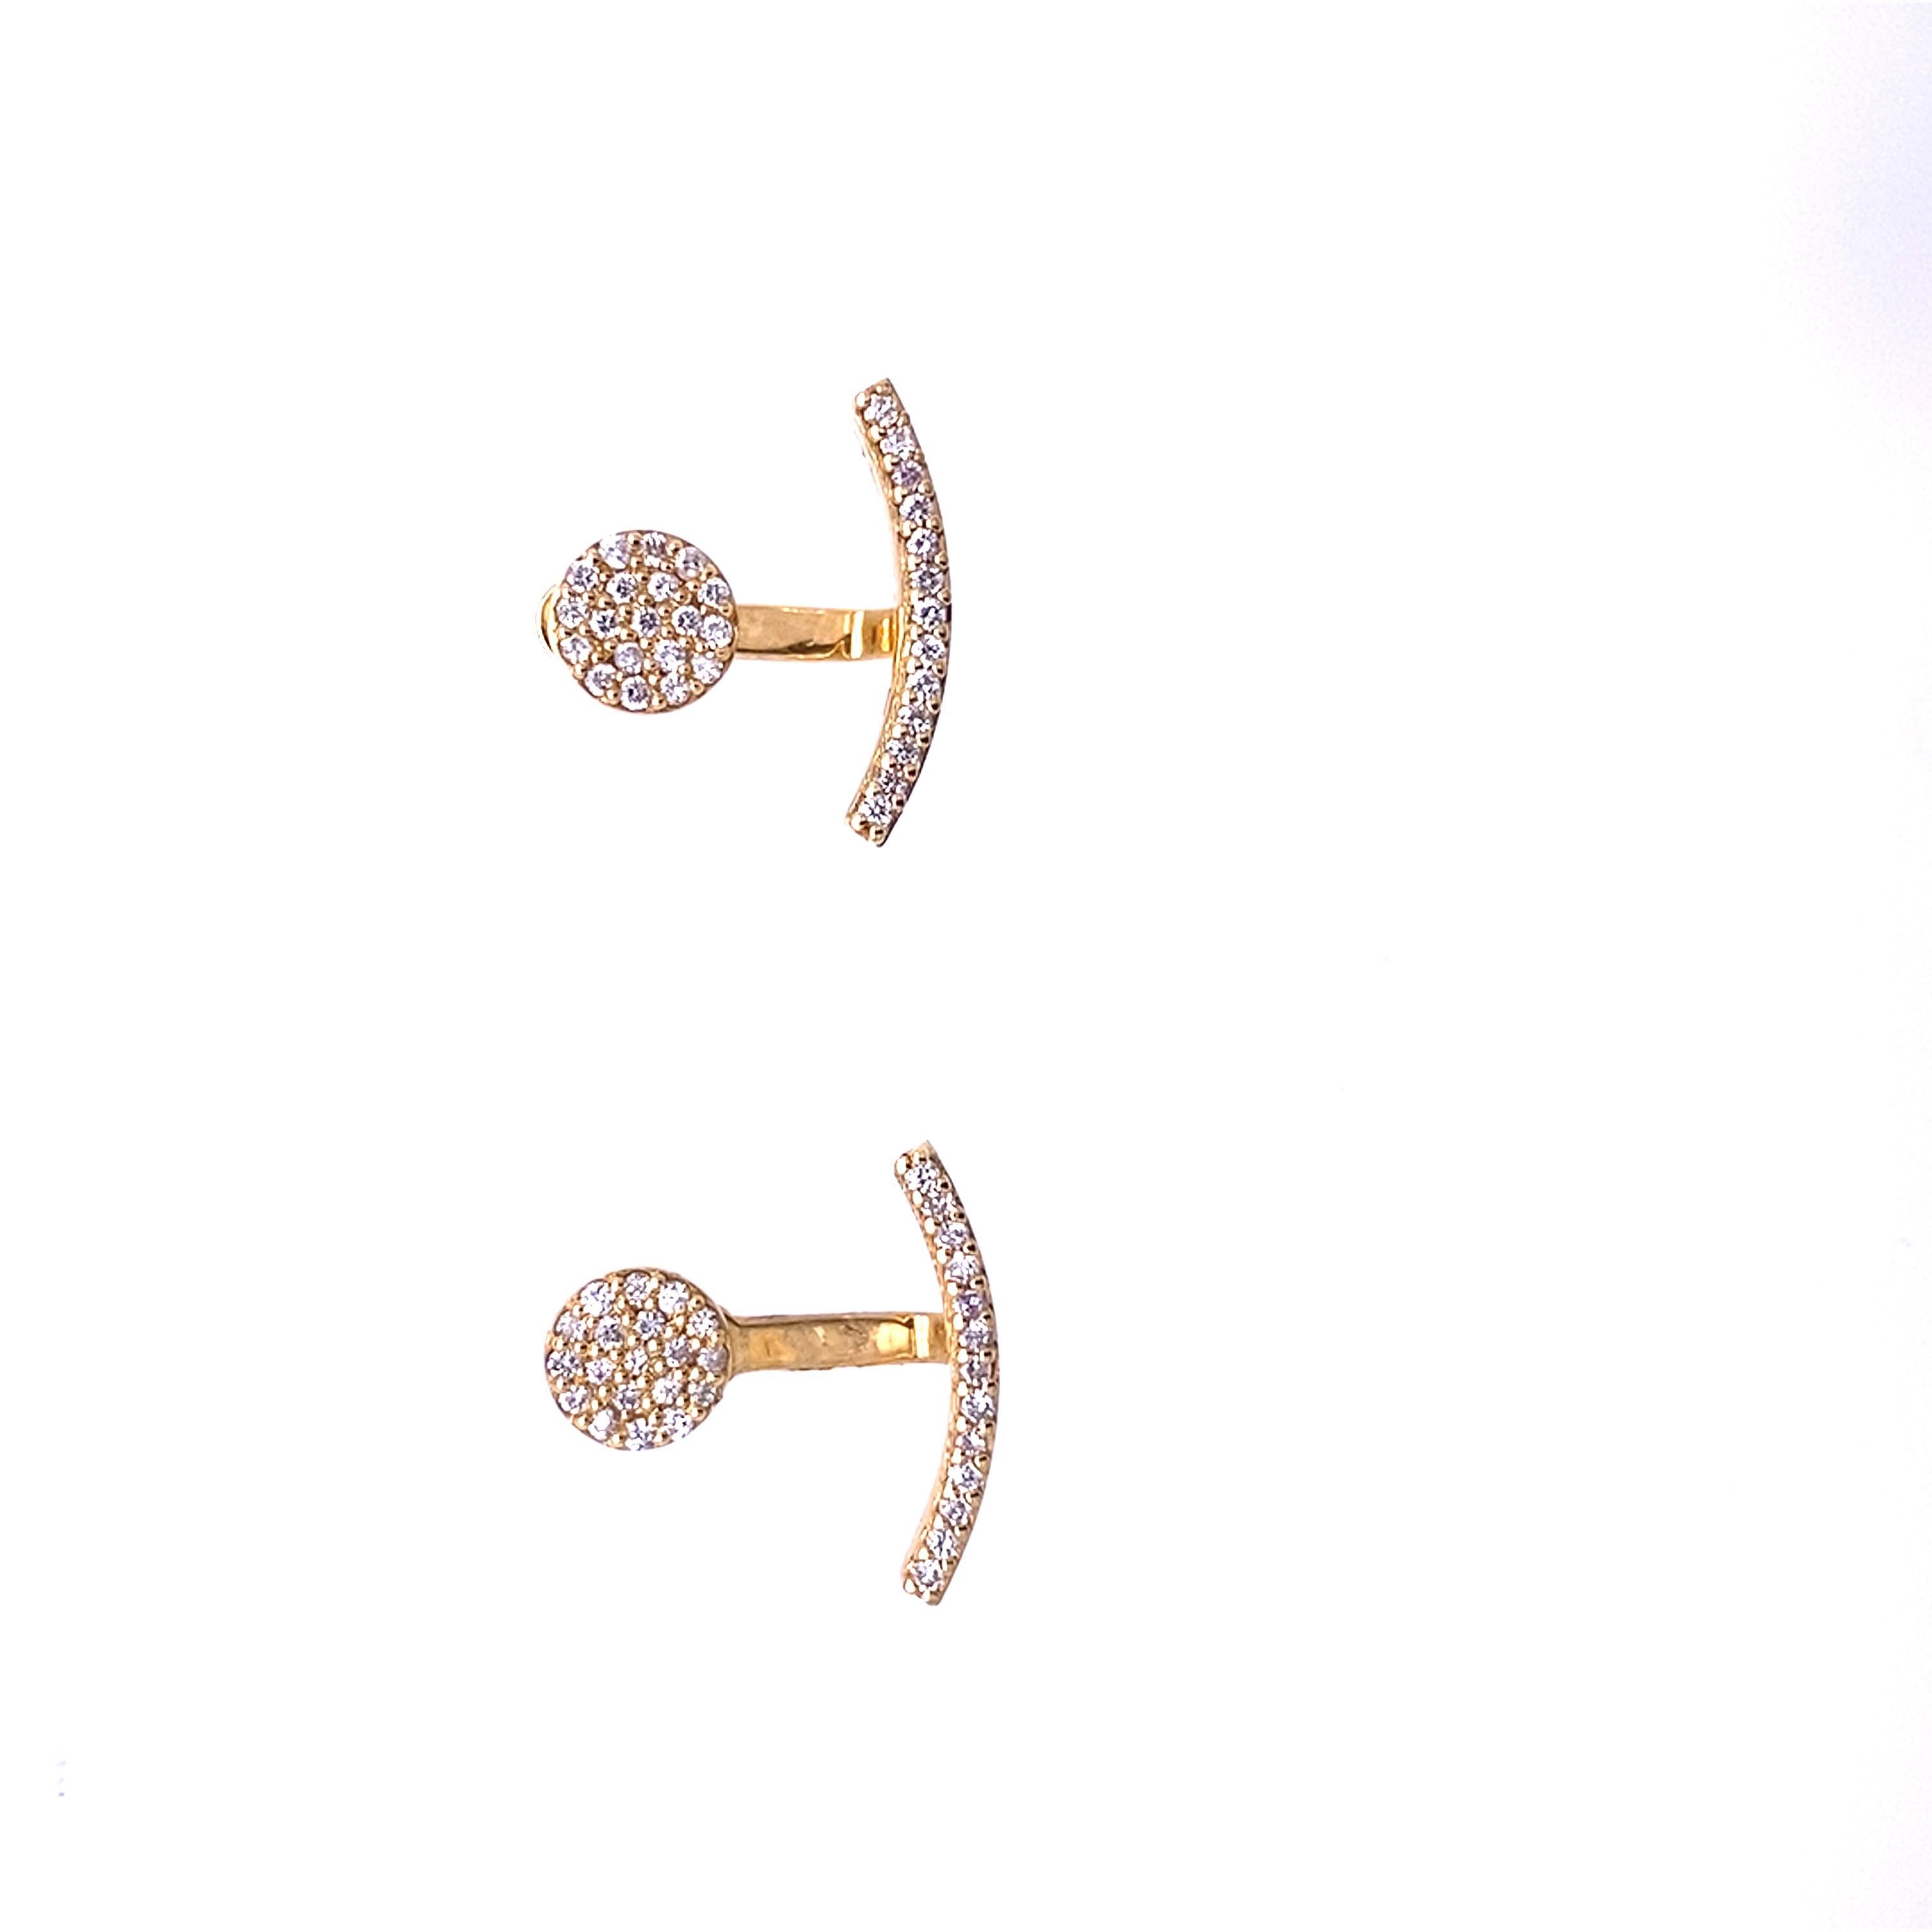 Fine Quality Drops & Studs Earrings Set with Diamonds in 18ct Yellow Gold In New Condition For Sale In London, GB